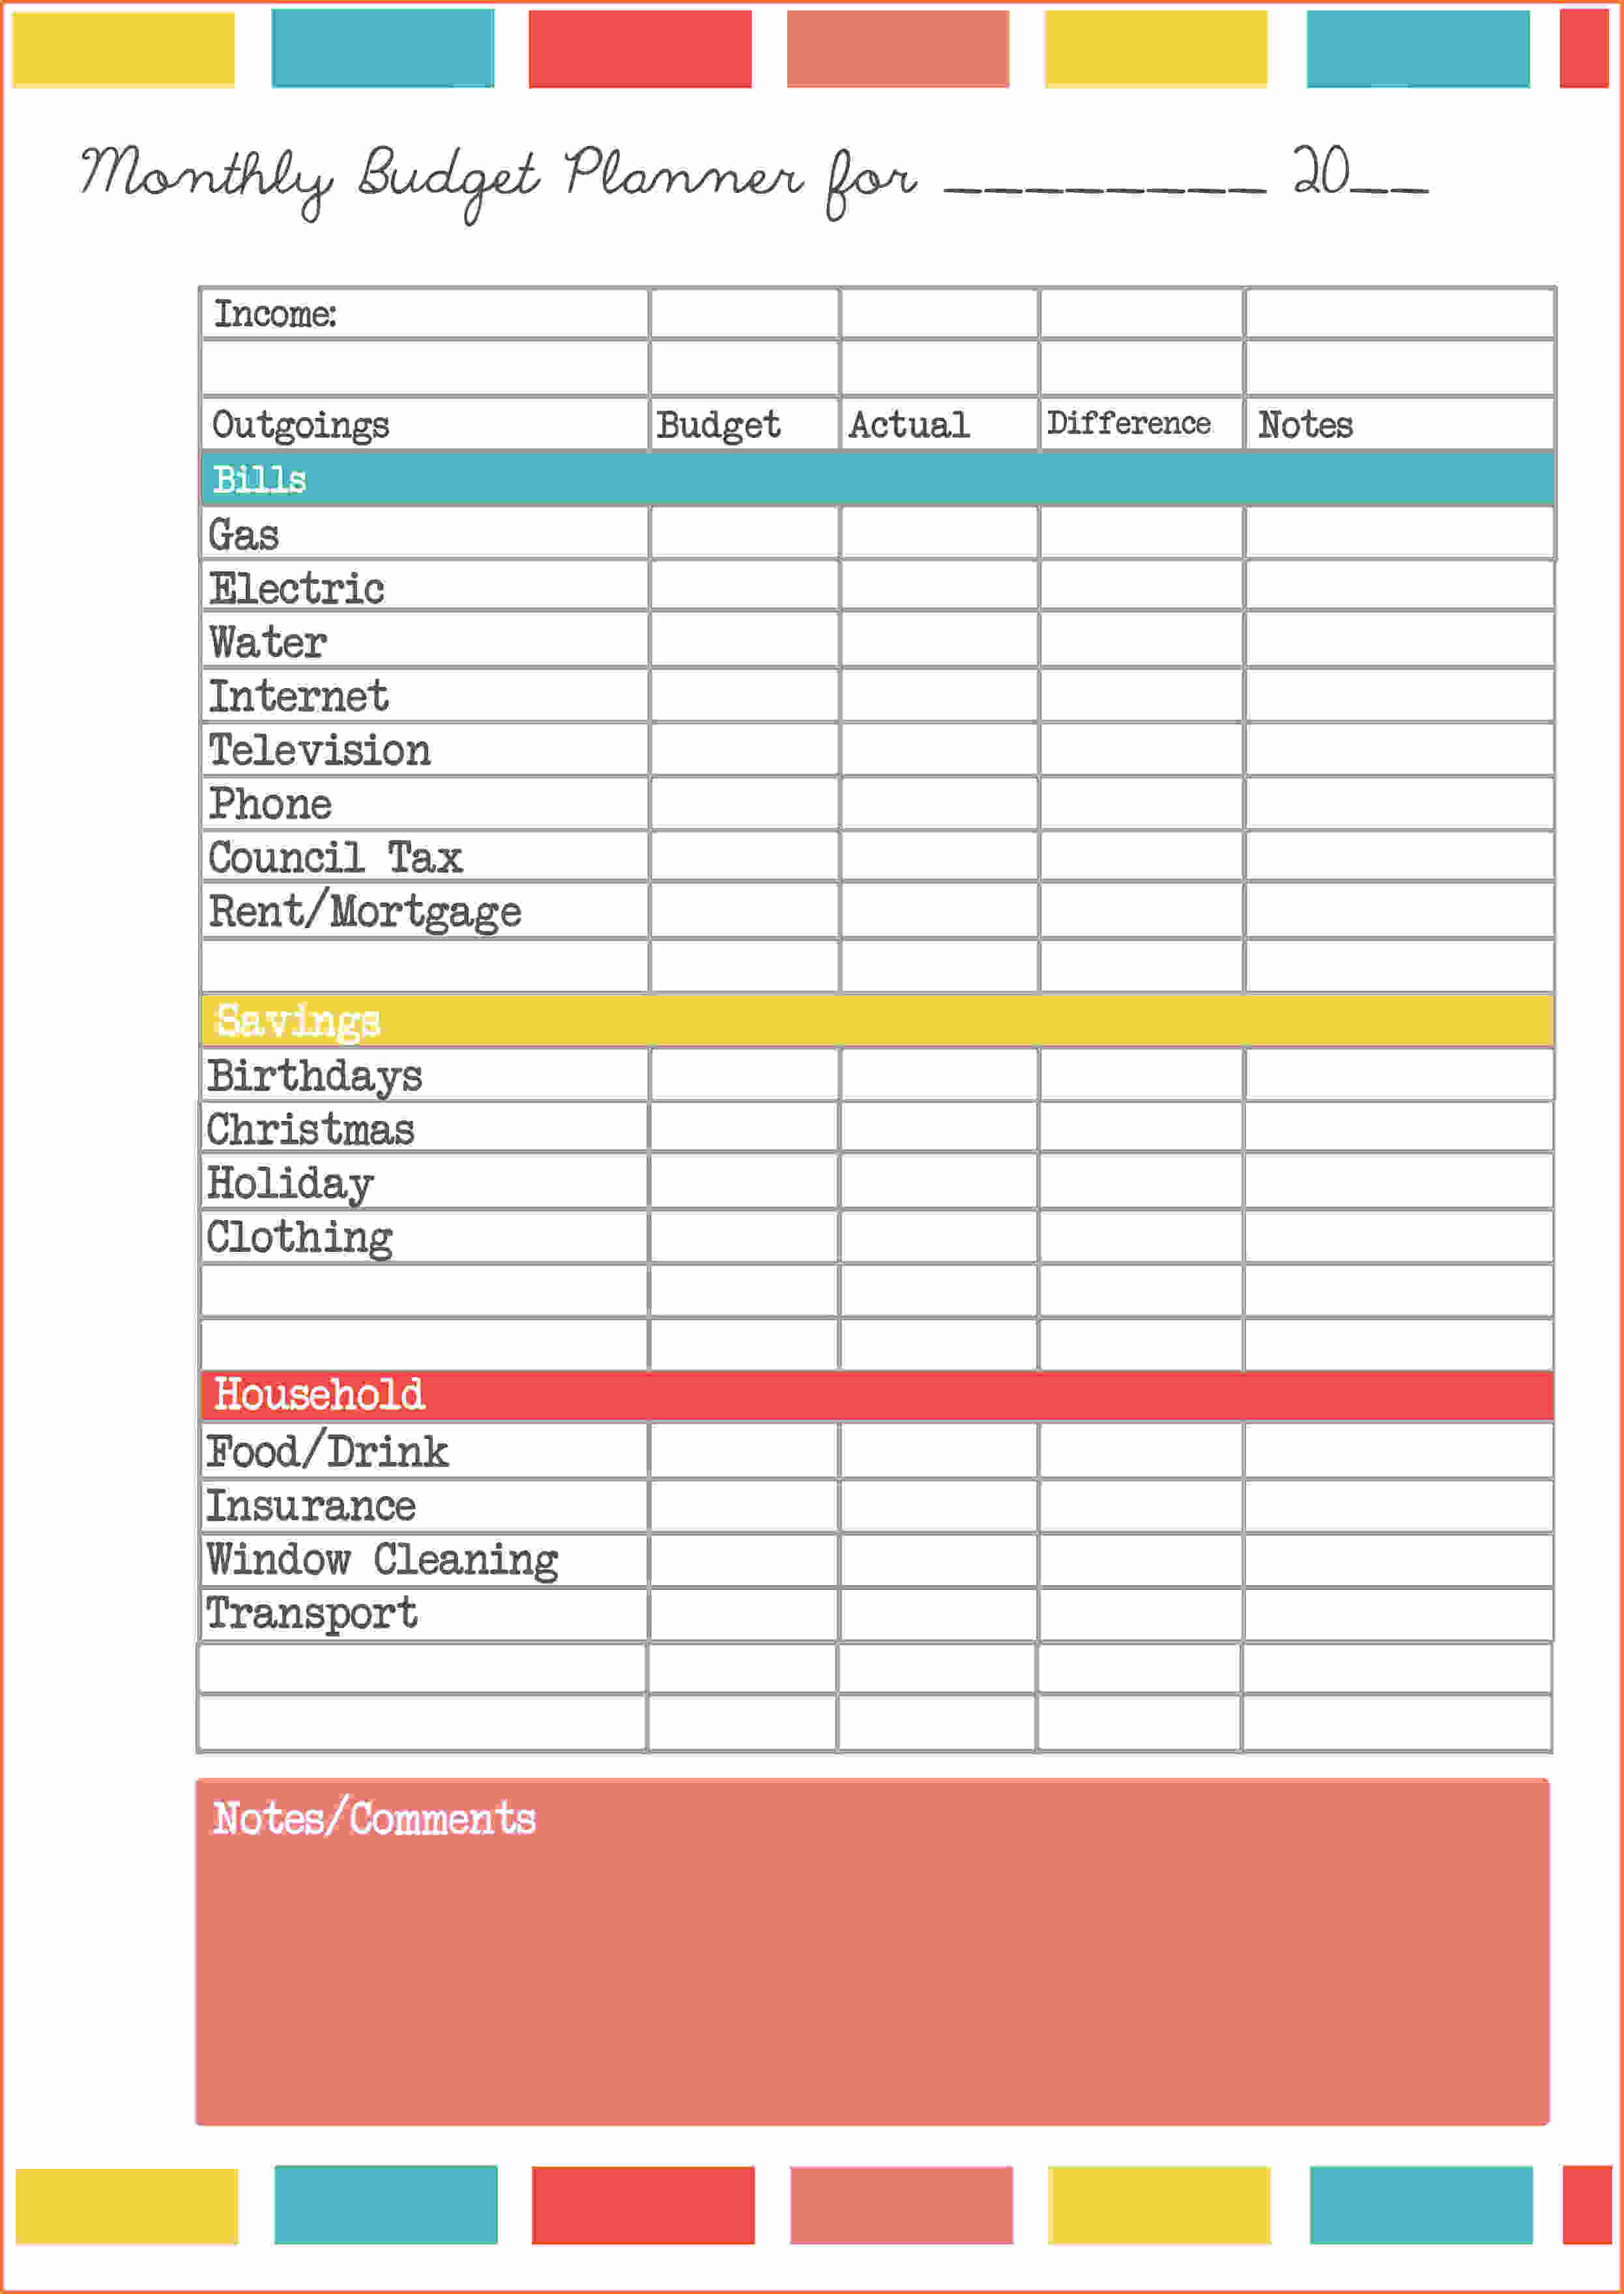 Free Printable Monthly Budget Planner Recent Of Best Personal Budget - Free Printable Budget Planner